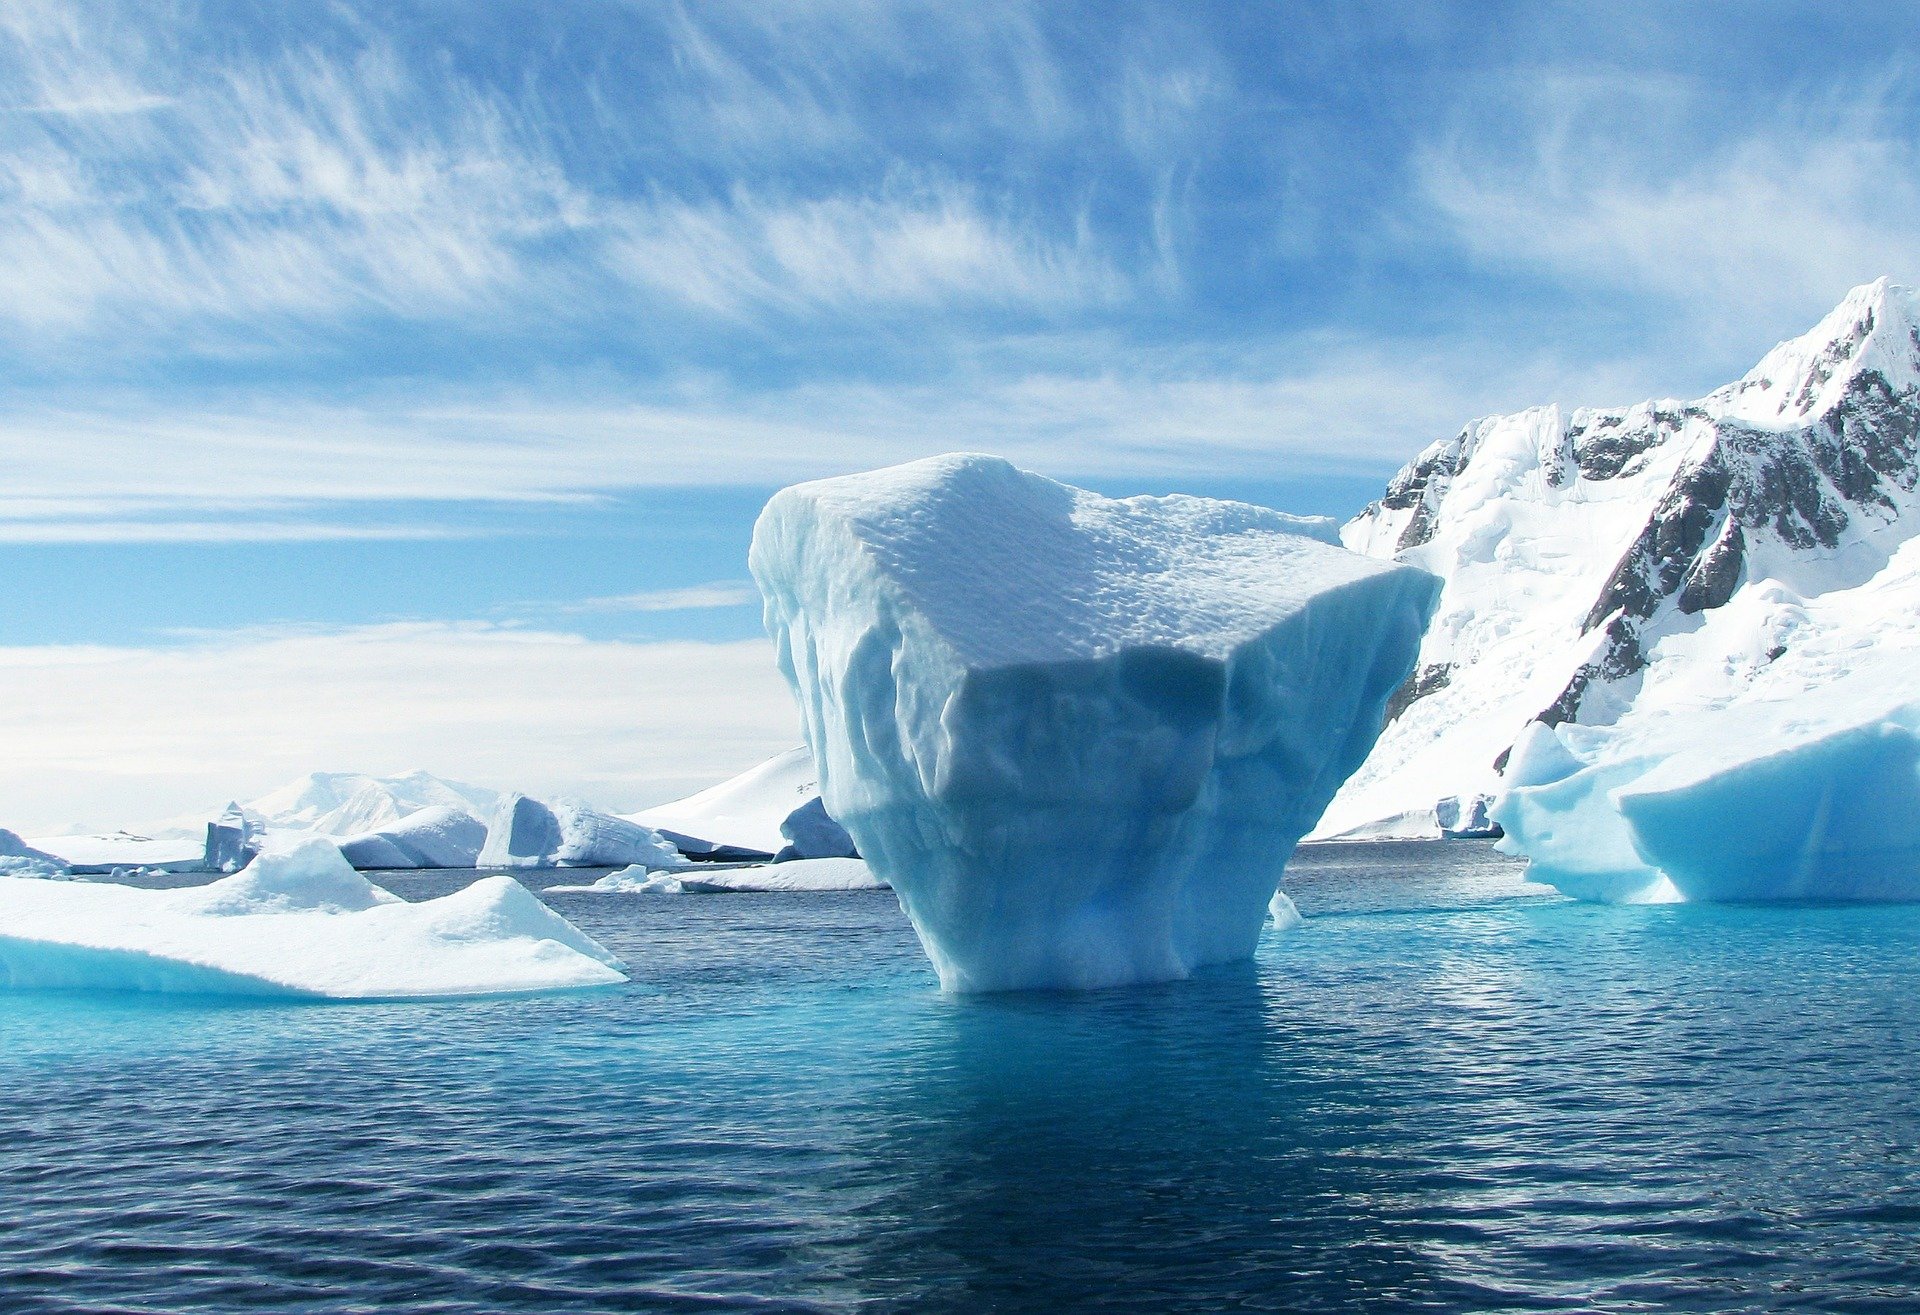 Diminishing Arctic sea ice has lasting impacts on global climate